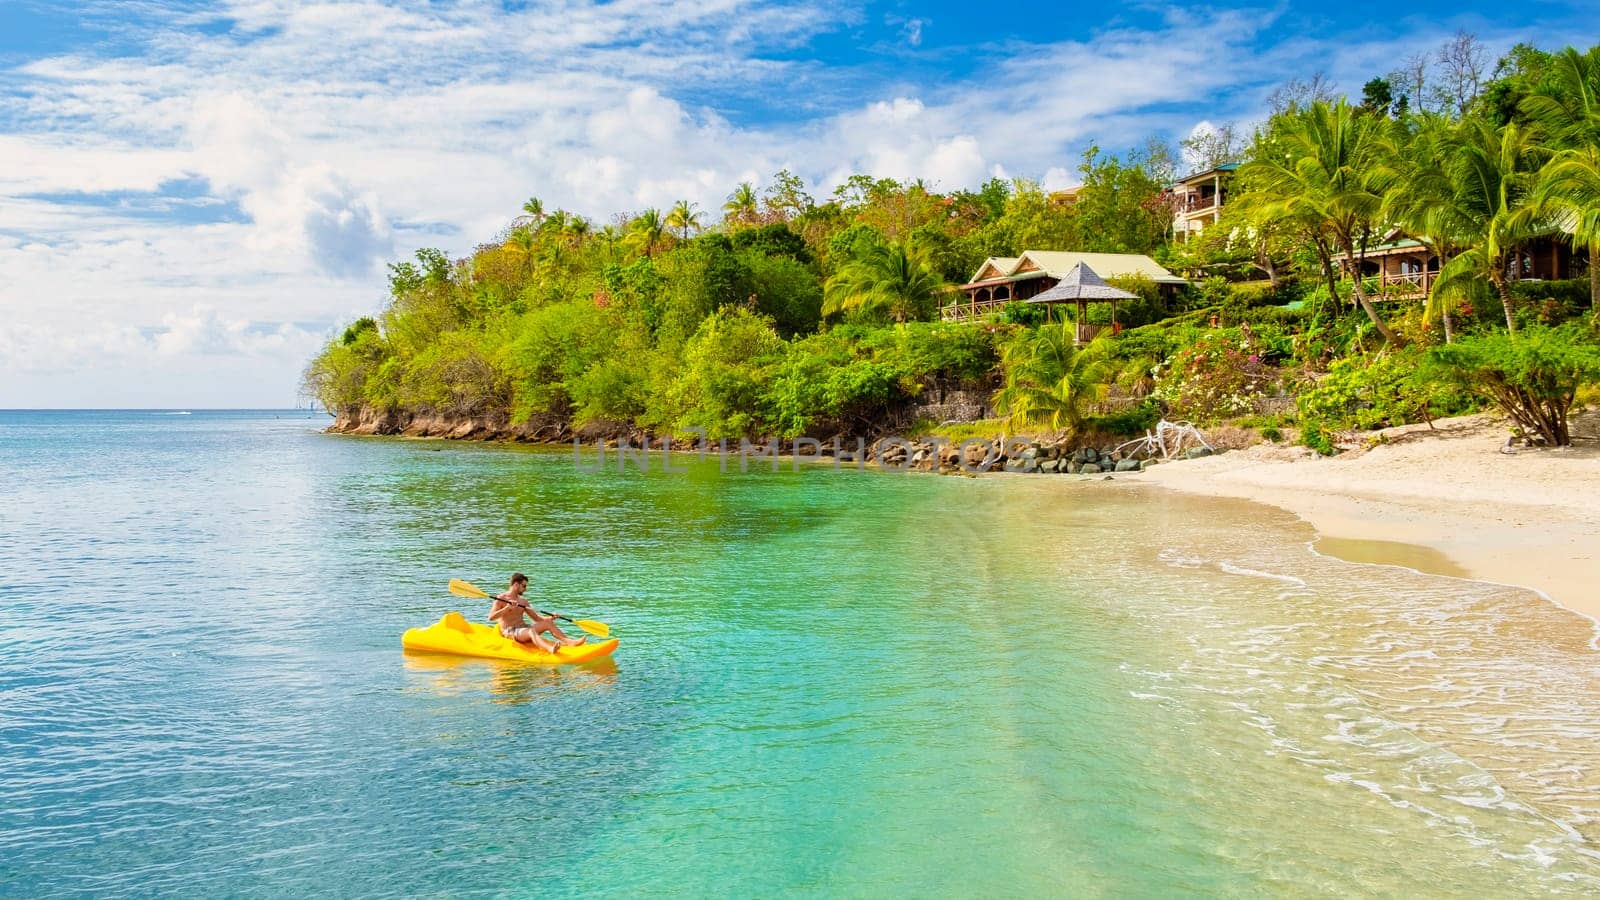 young men in kayak at a tropical island in the Caribbean sea, St Lucia or Saint Lucia by fokkebok